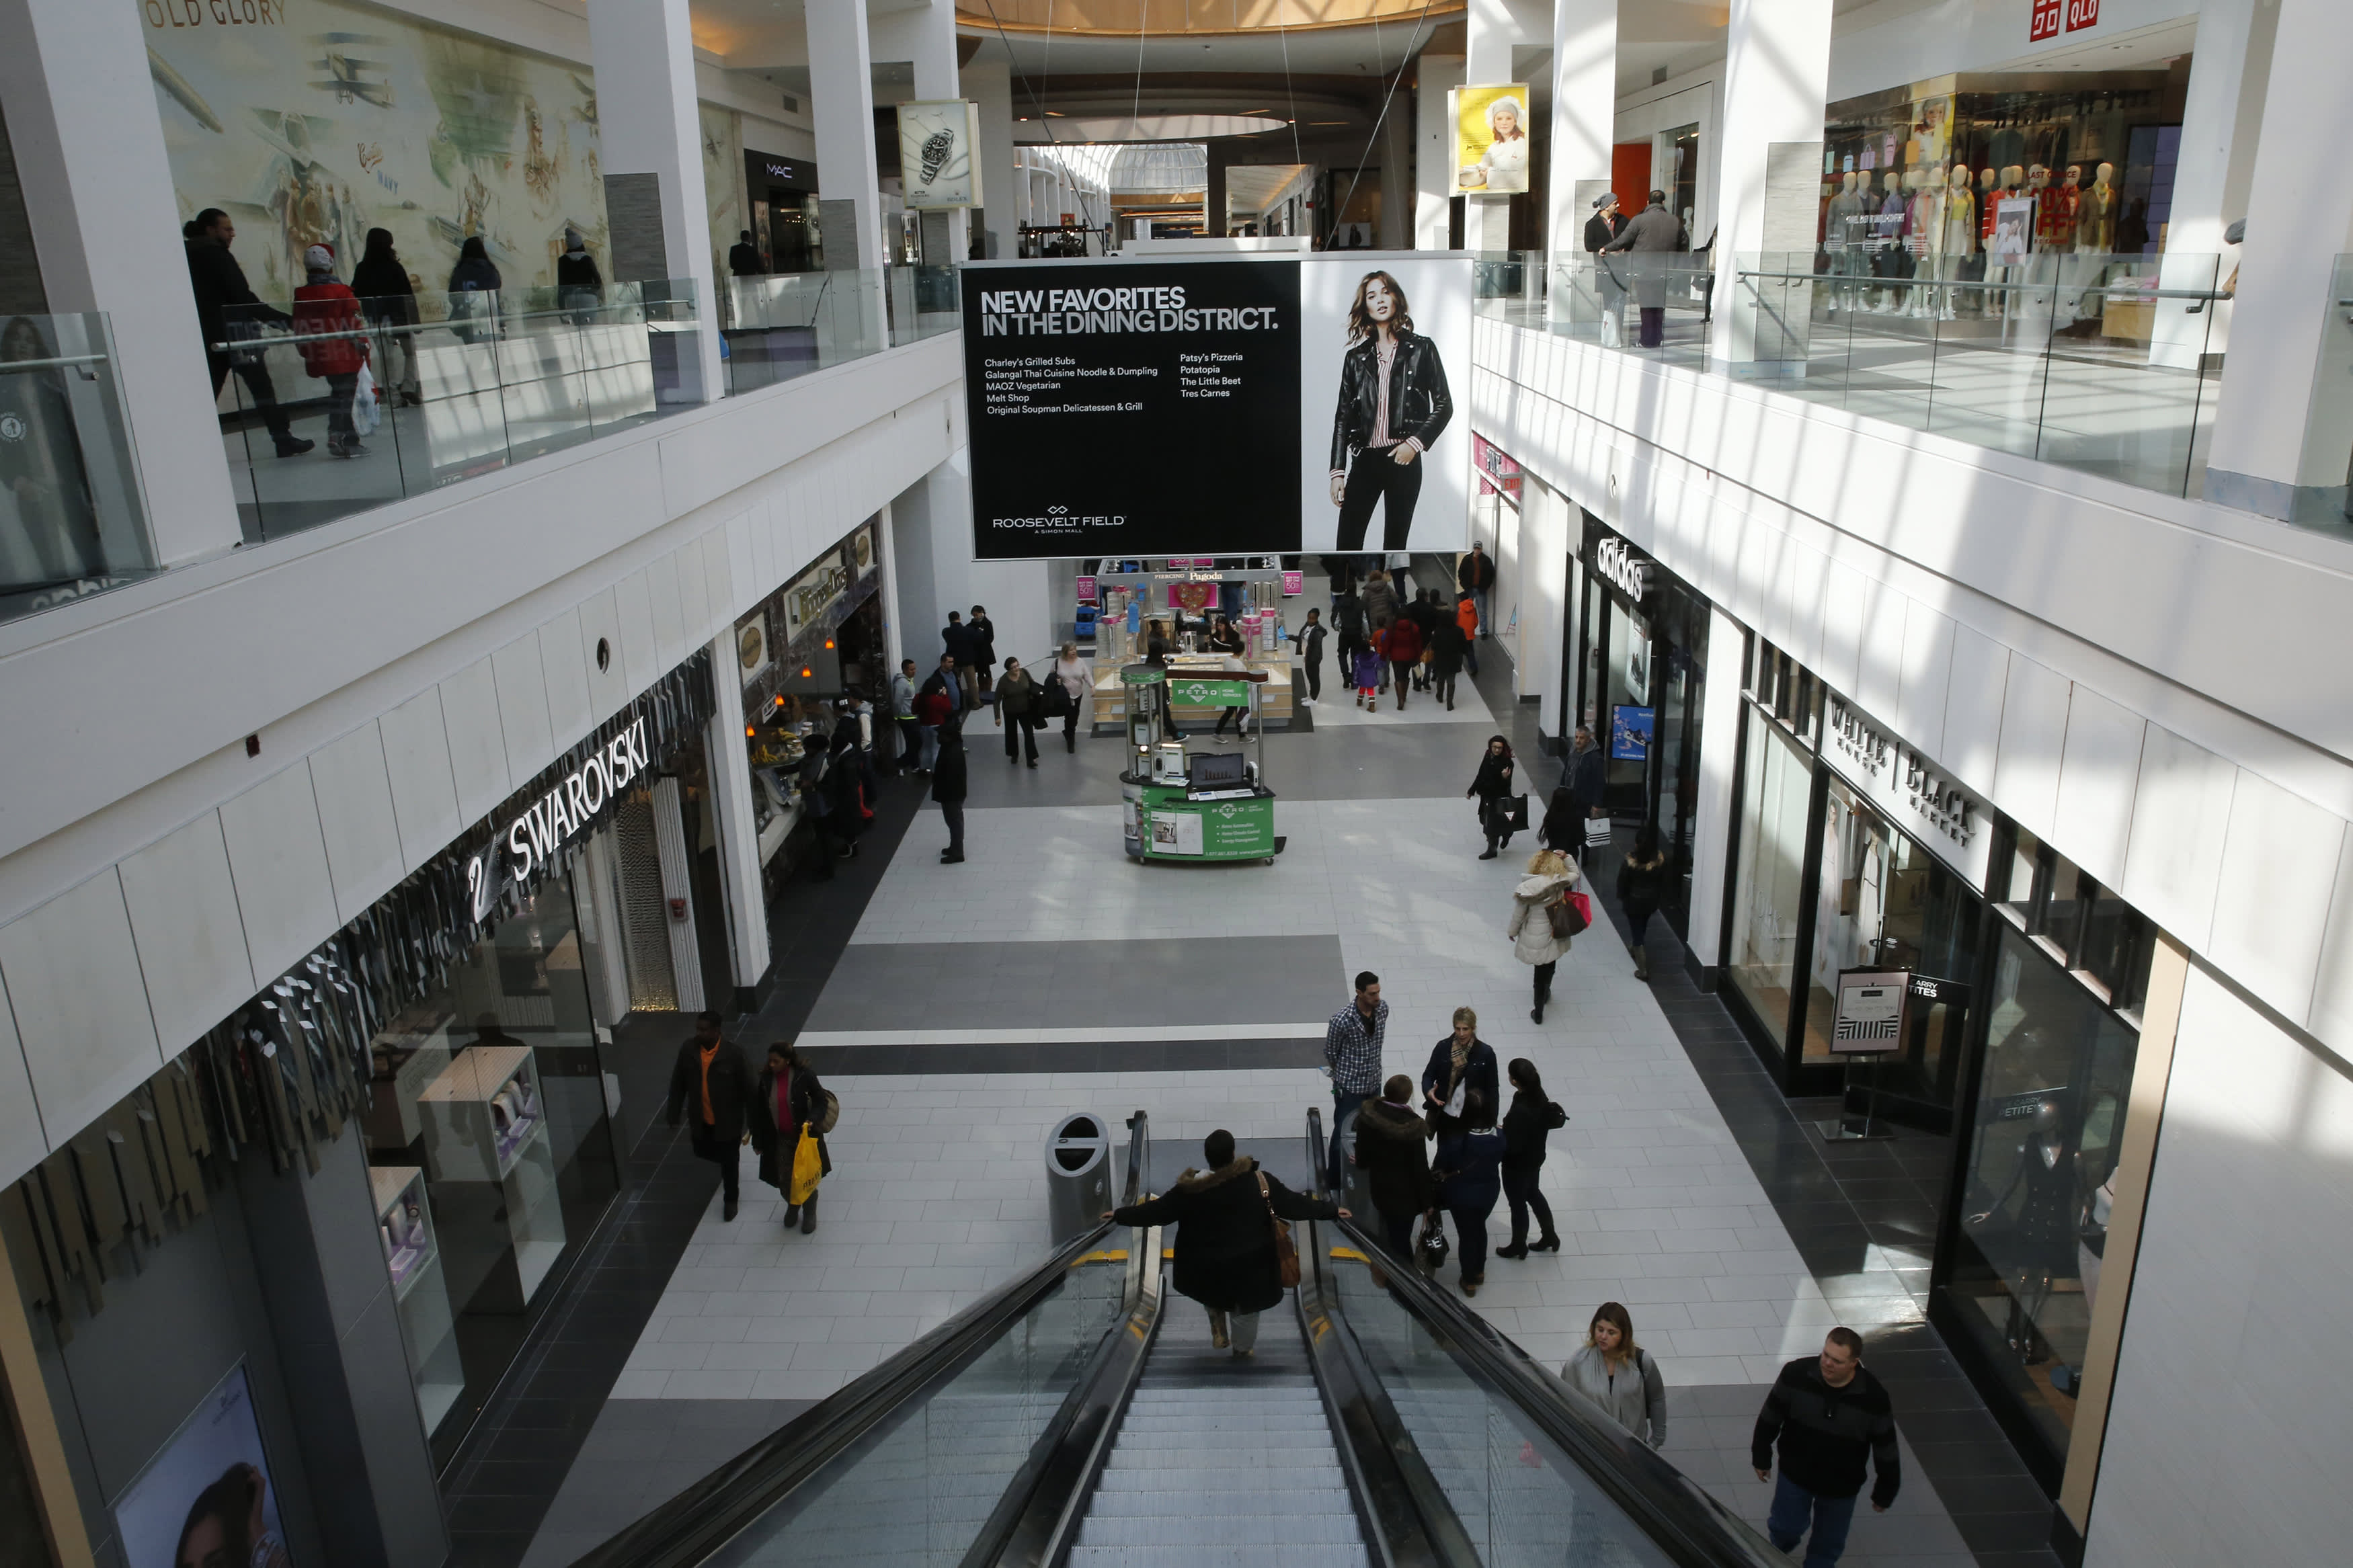 The 10 most valuable malls in America before the coronavirus pandemic